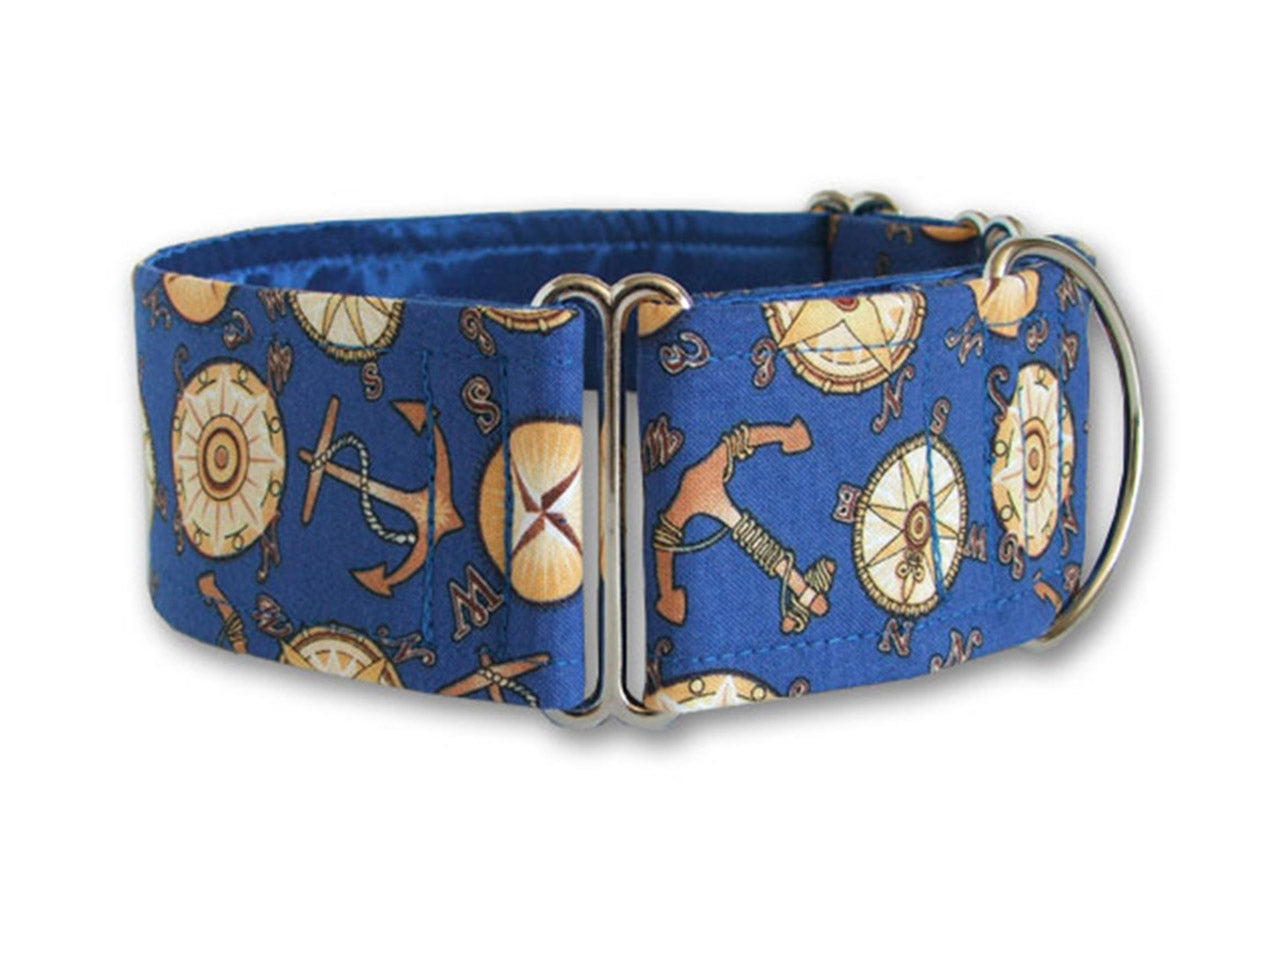 Rover will chart a course to his next adventure (or nap) in this stylish blue nautical-themed collar!